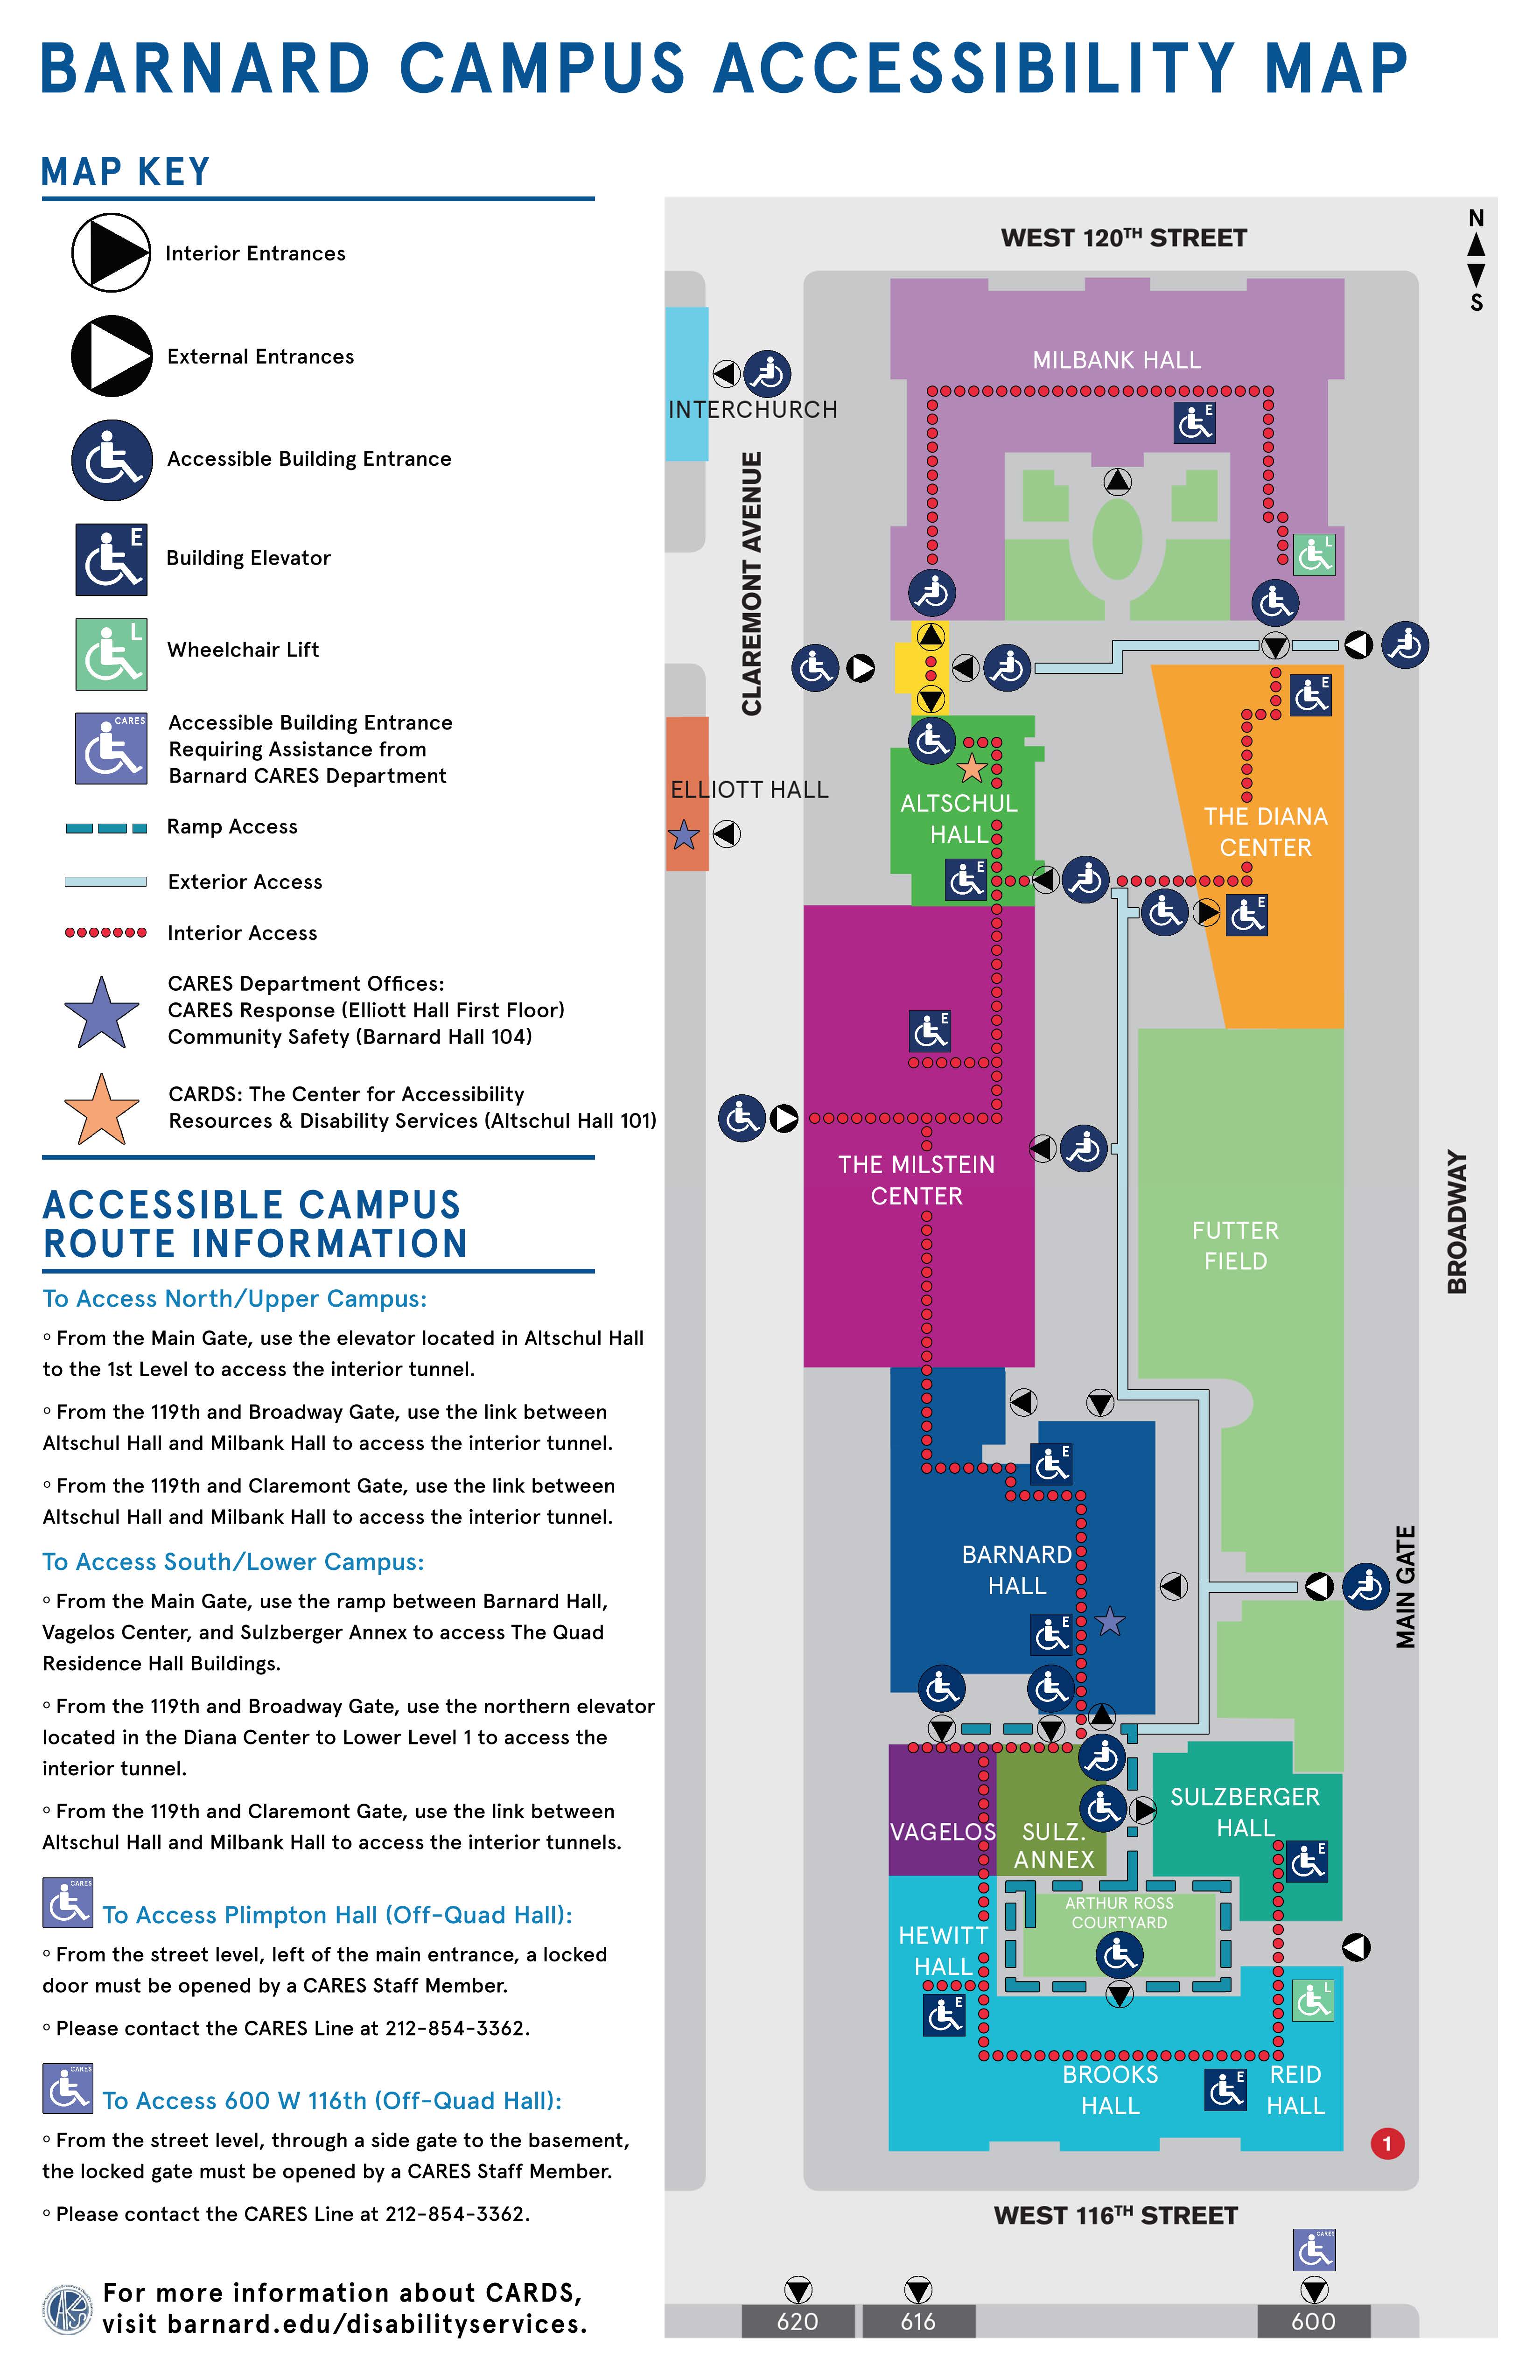 Map of Barnard Campus with accessibility information for each building's entrances / exits